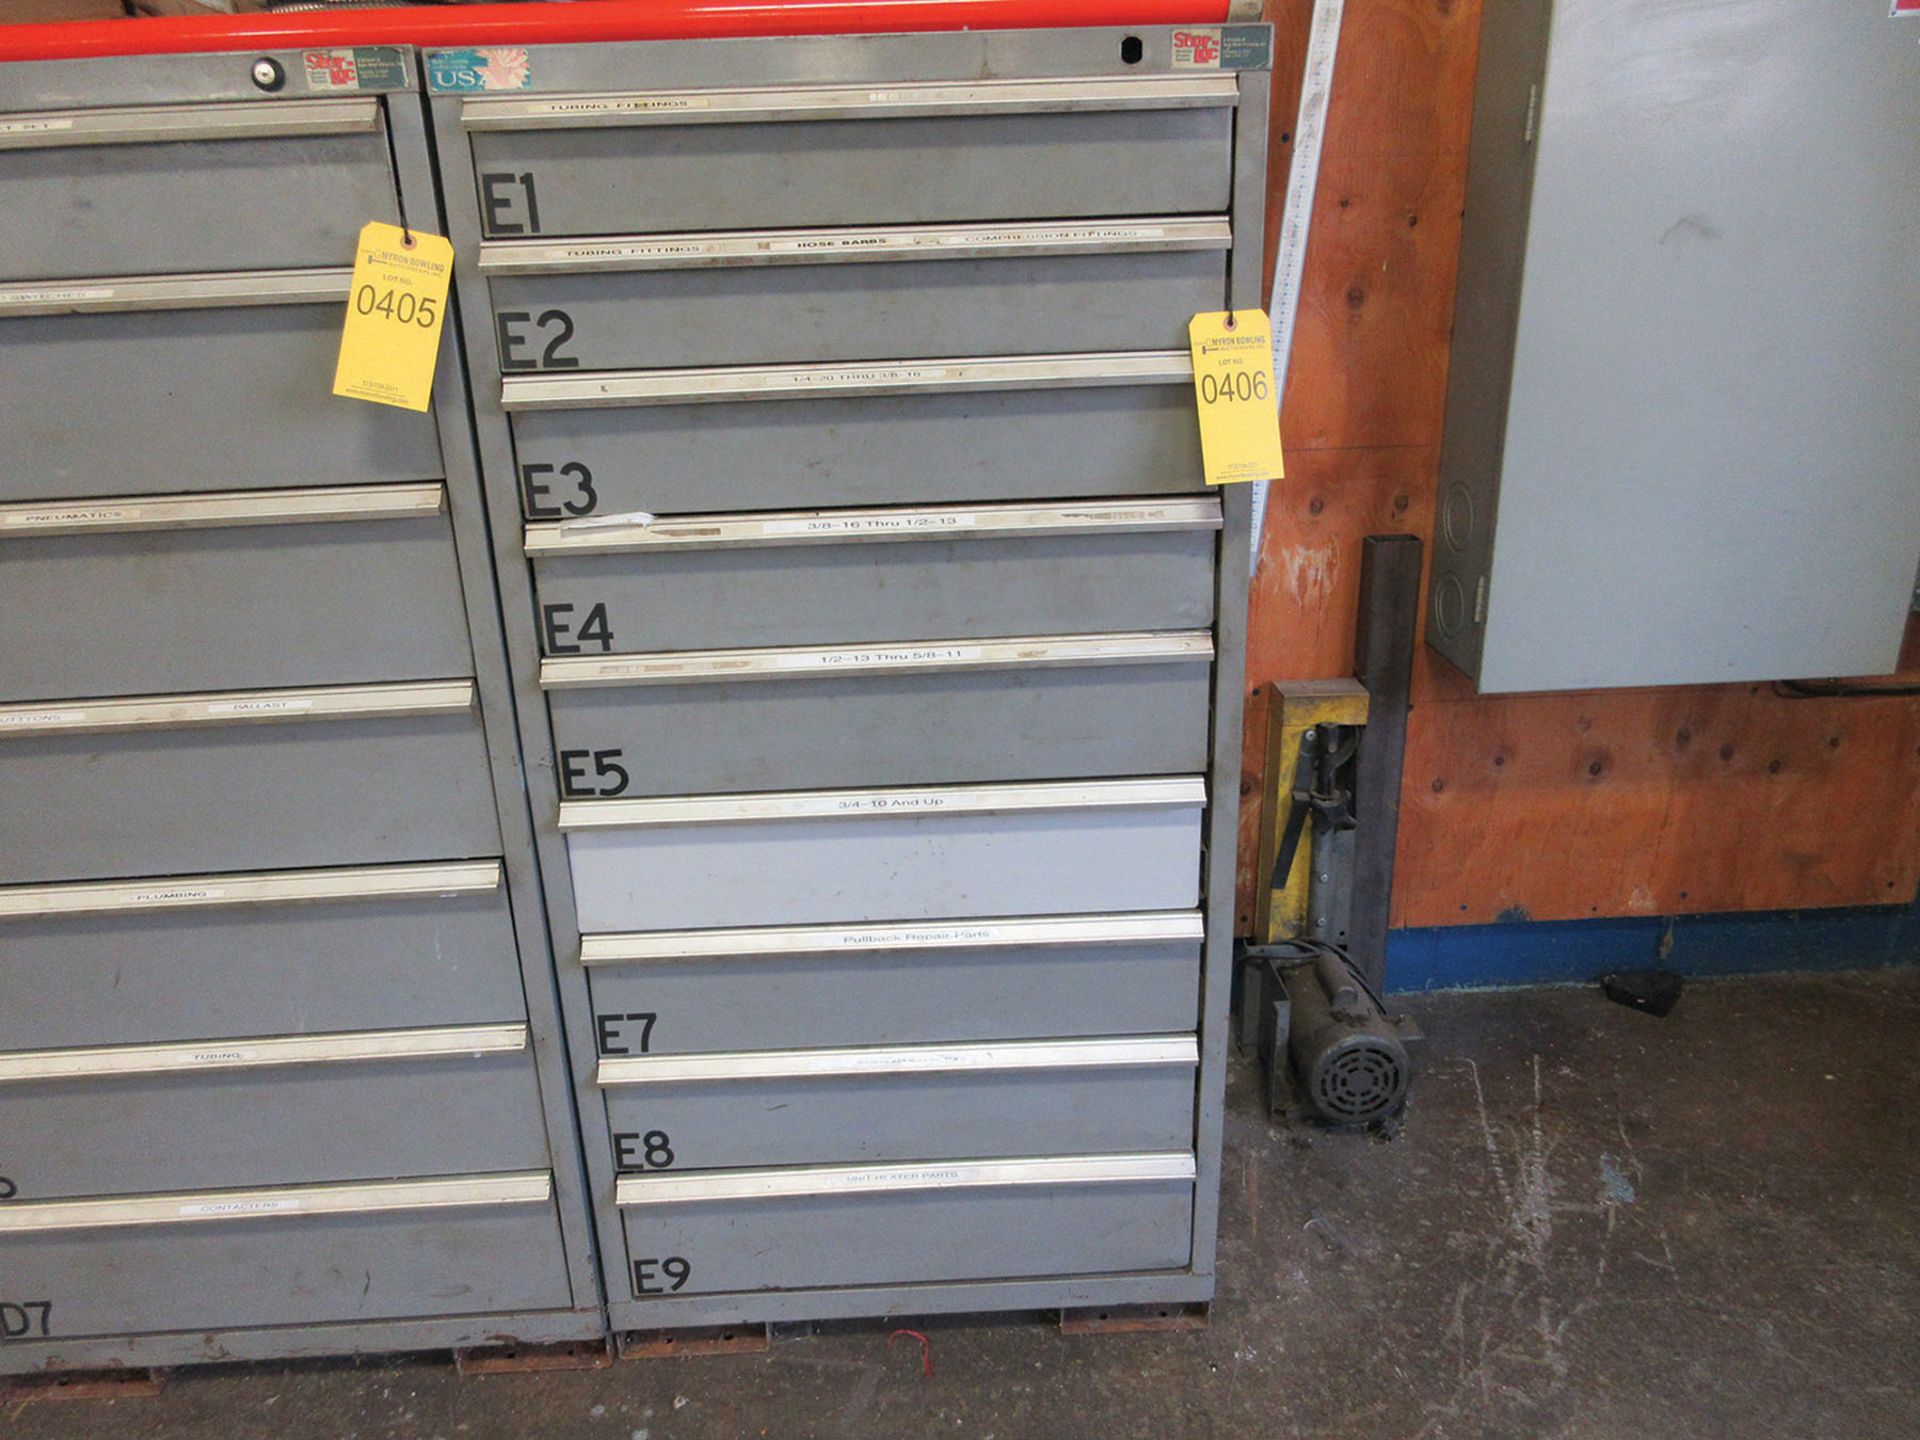 STOR-LOC 9-DRAWER CABINET WITH CONTENTS; TUB FITTINGS, COMPRESSION FITTINGS, AND NUTS & BOLTS